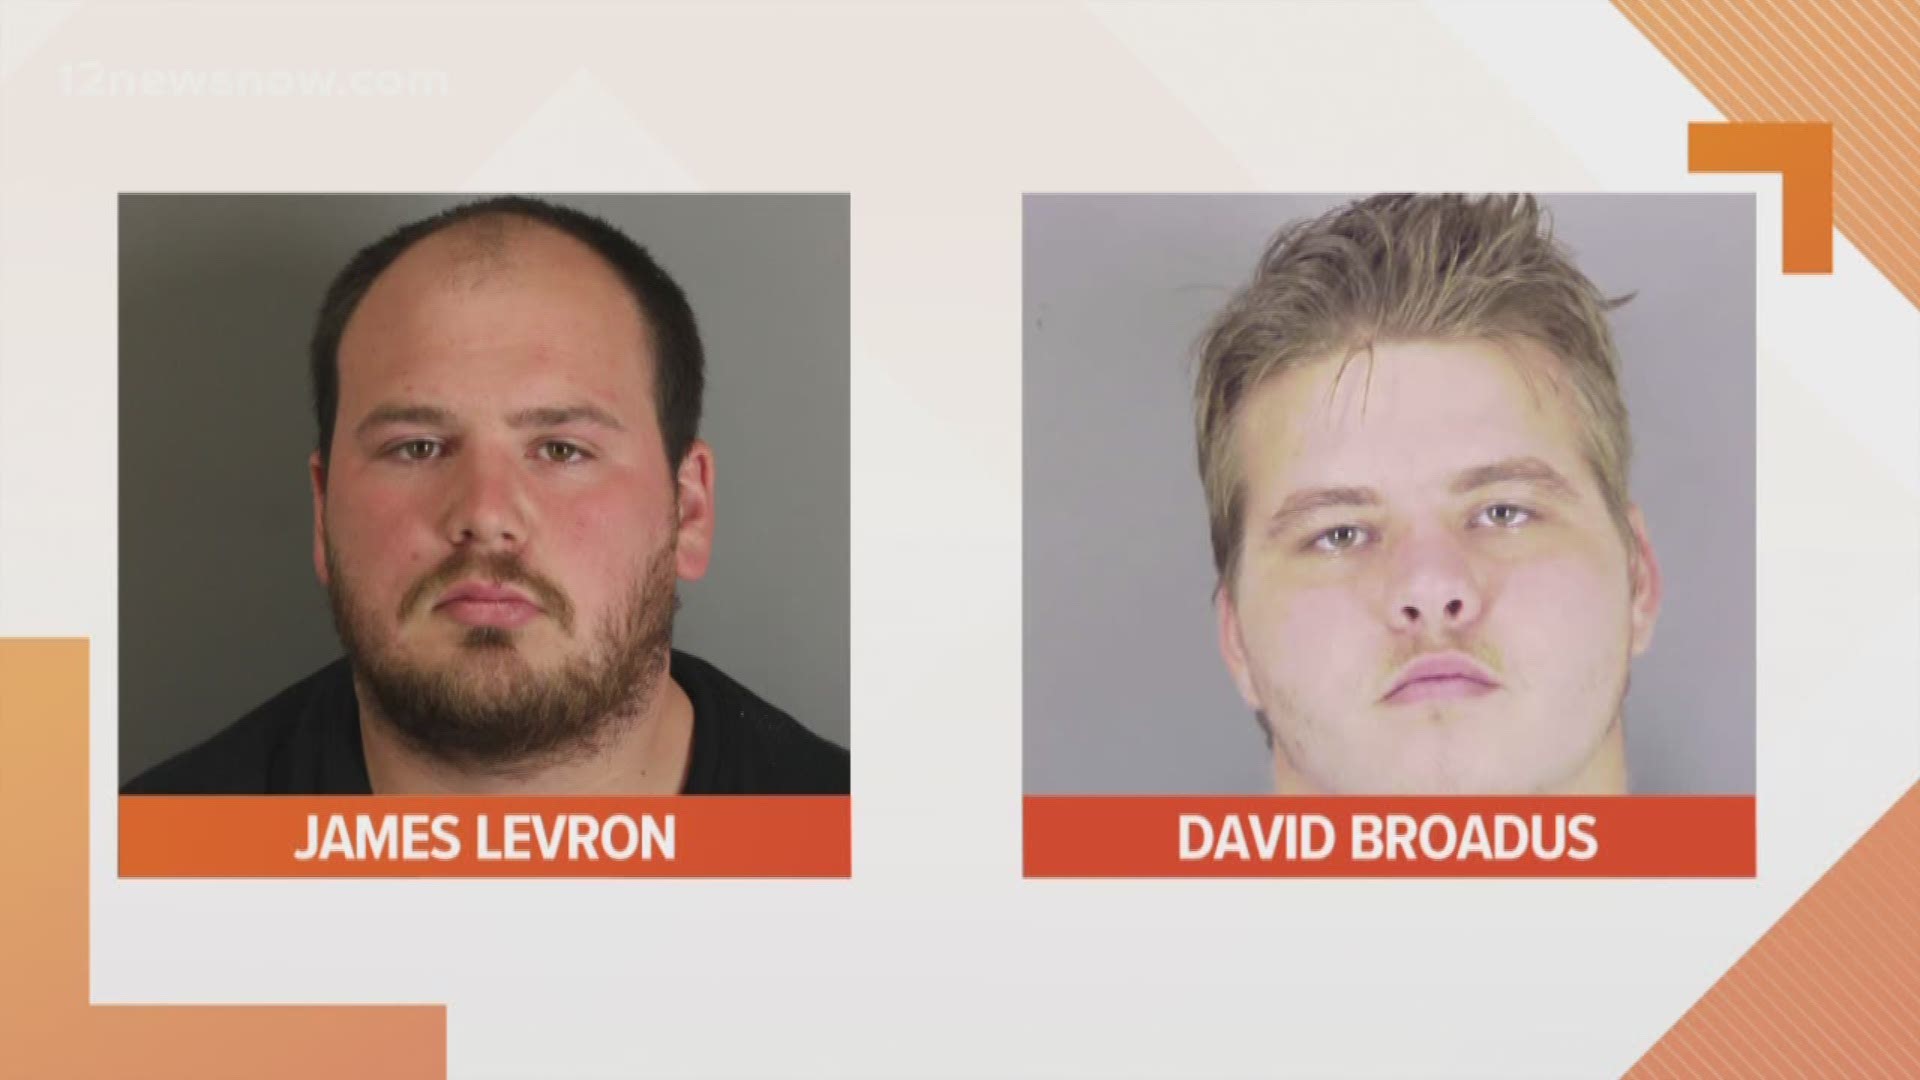 19-year-old David Broadus and James Levron were accused of killing Jose Leal in January 2018 during a car chase in Port Arthur. The shooting led to a crash involving five cars on Highway 69. Both men were indicted for a second degree felony of aggravated assault and murder.